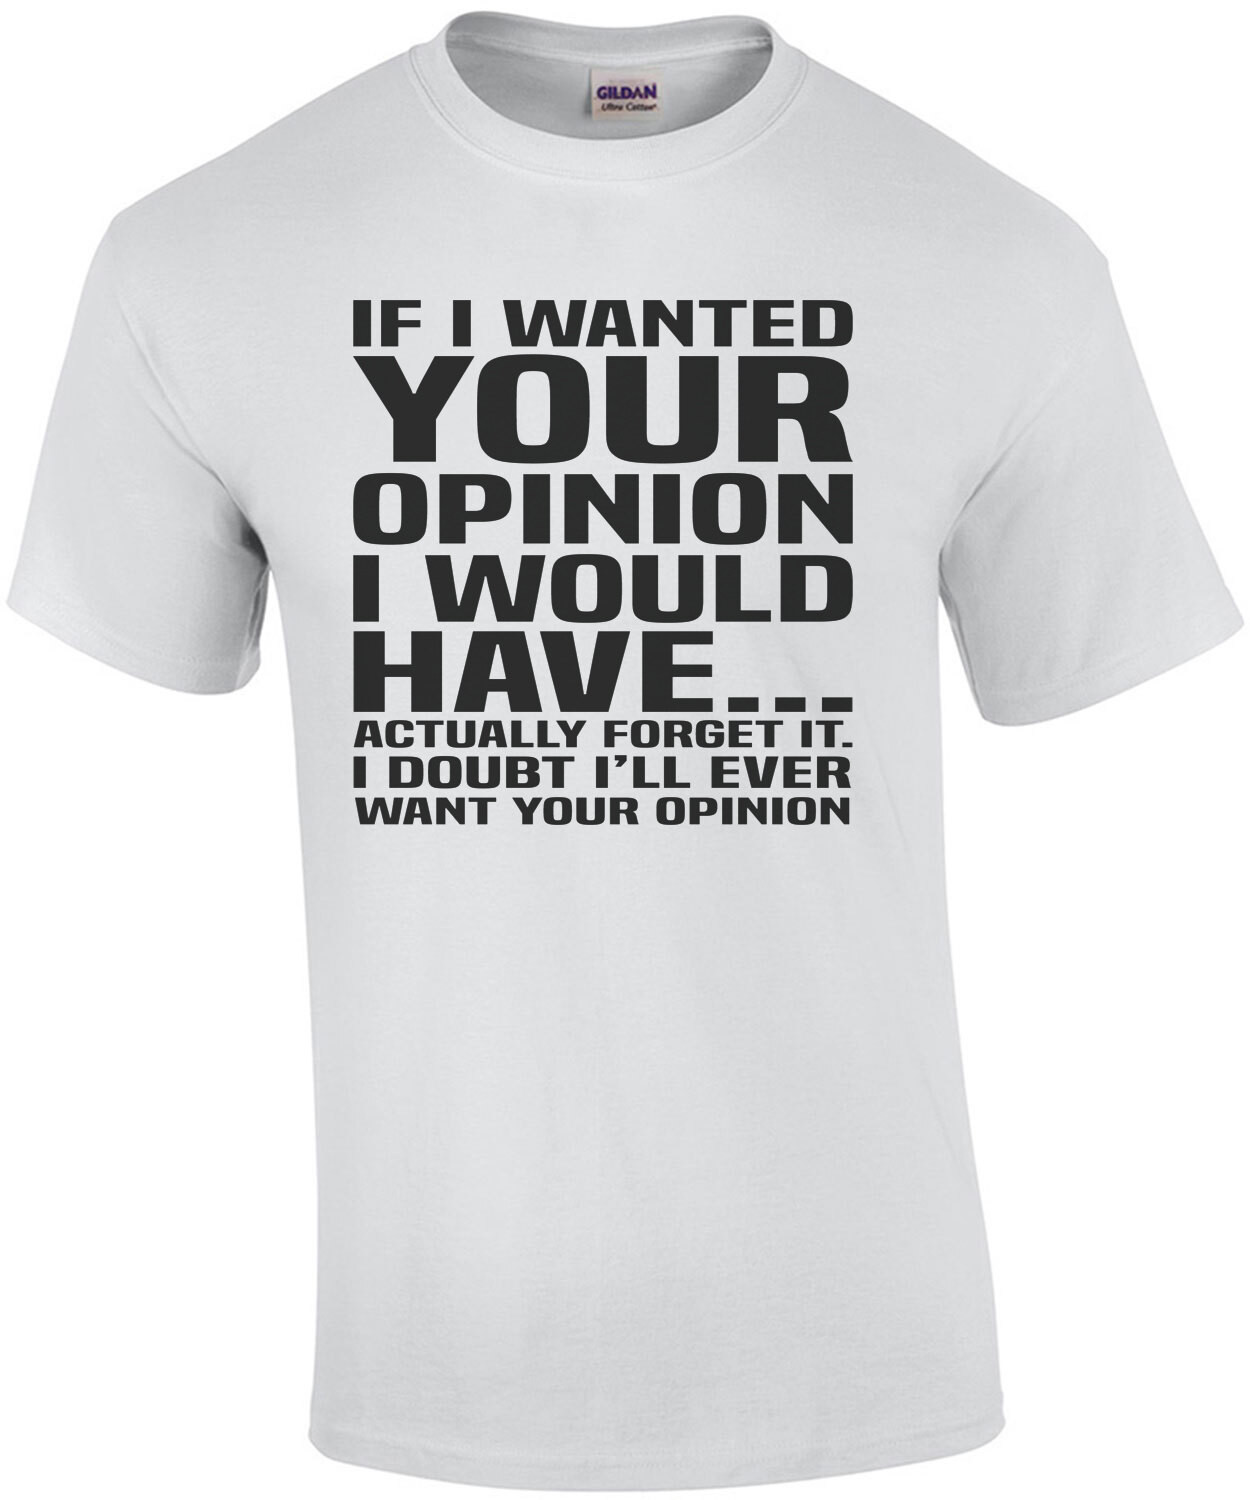 If I wanted your opinion I would have... actually forget it. I doubt I'll ever want your opinion - sarcastic t-shirt